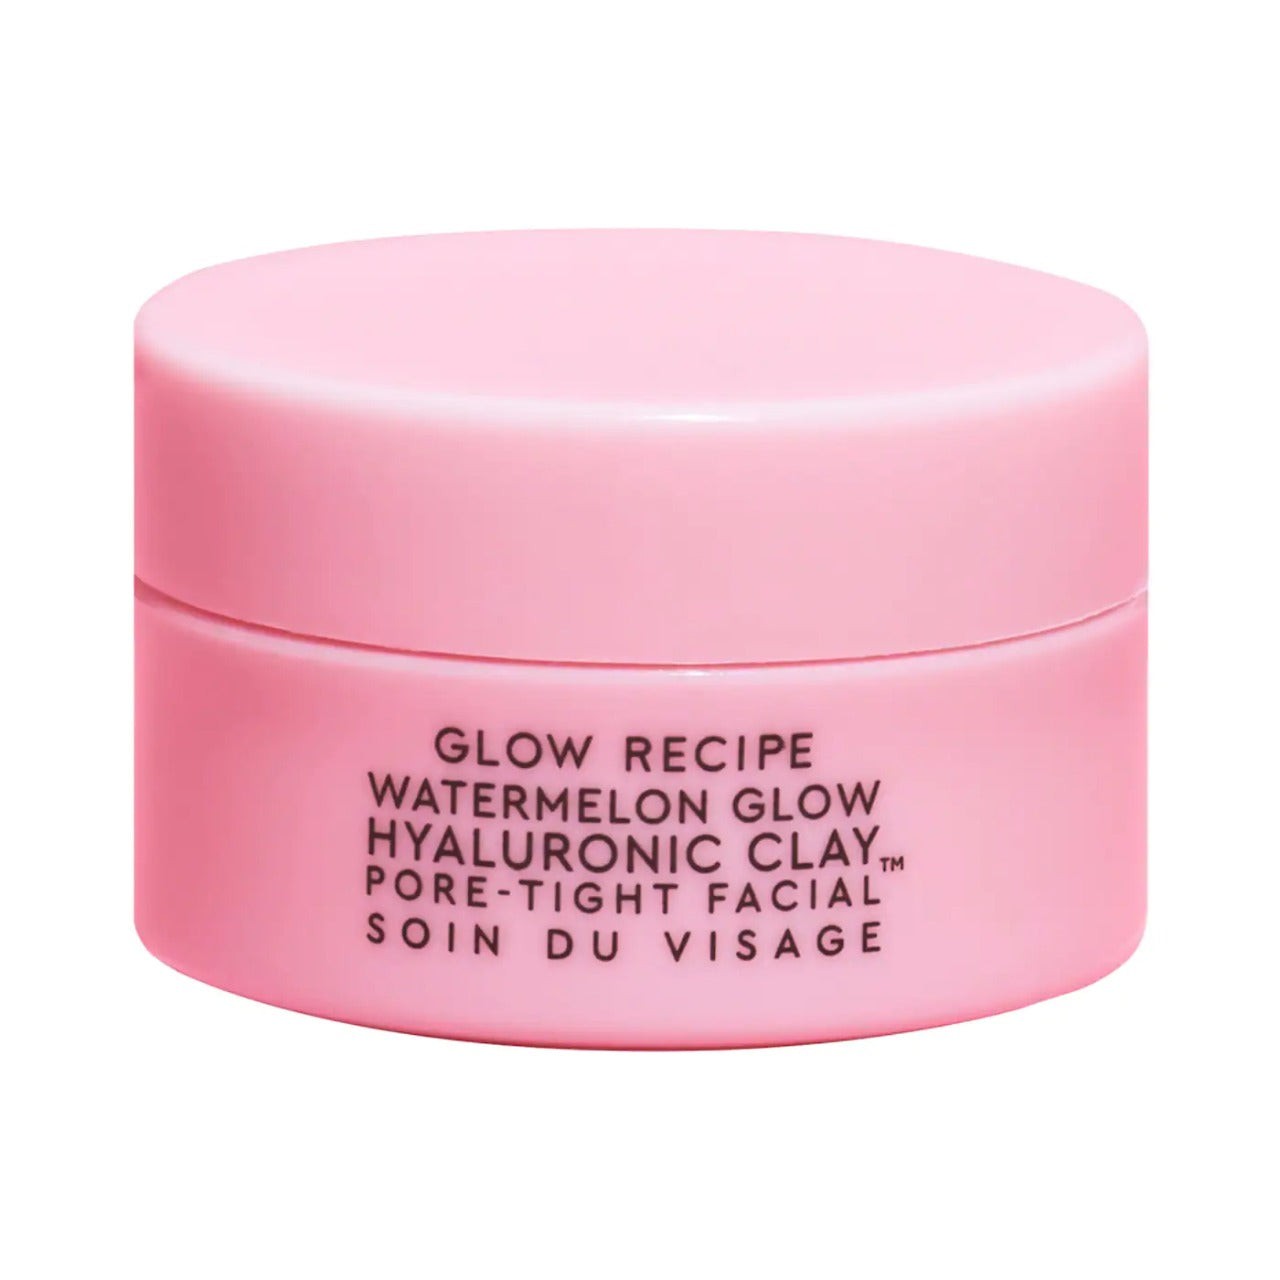 Watermelon Glow Hyaluronic Clay Pore-Tight Facial trial size